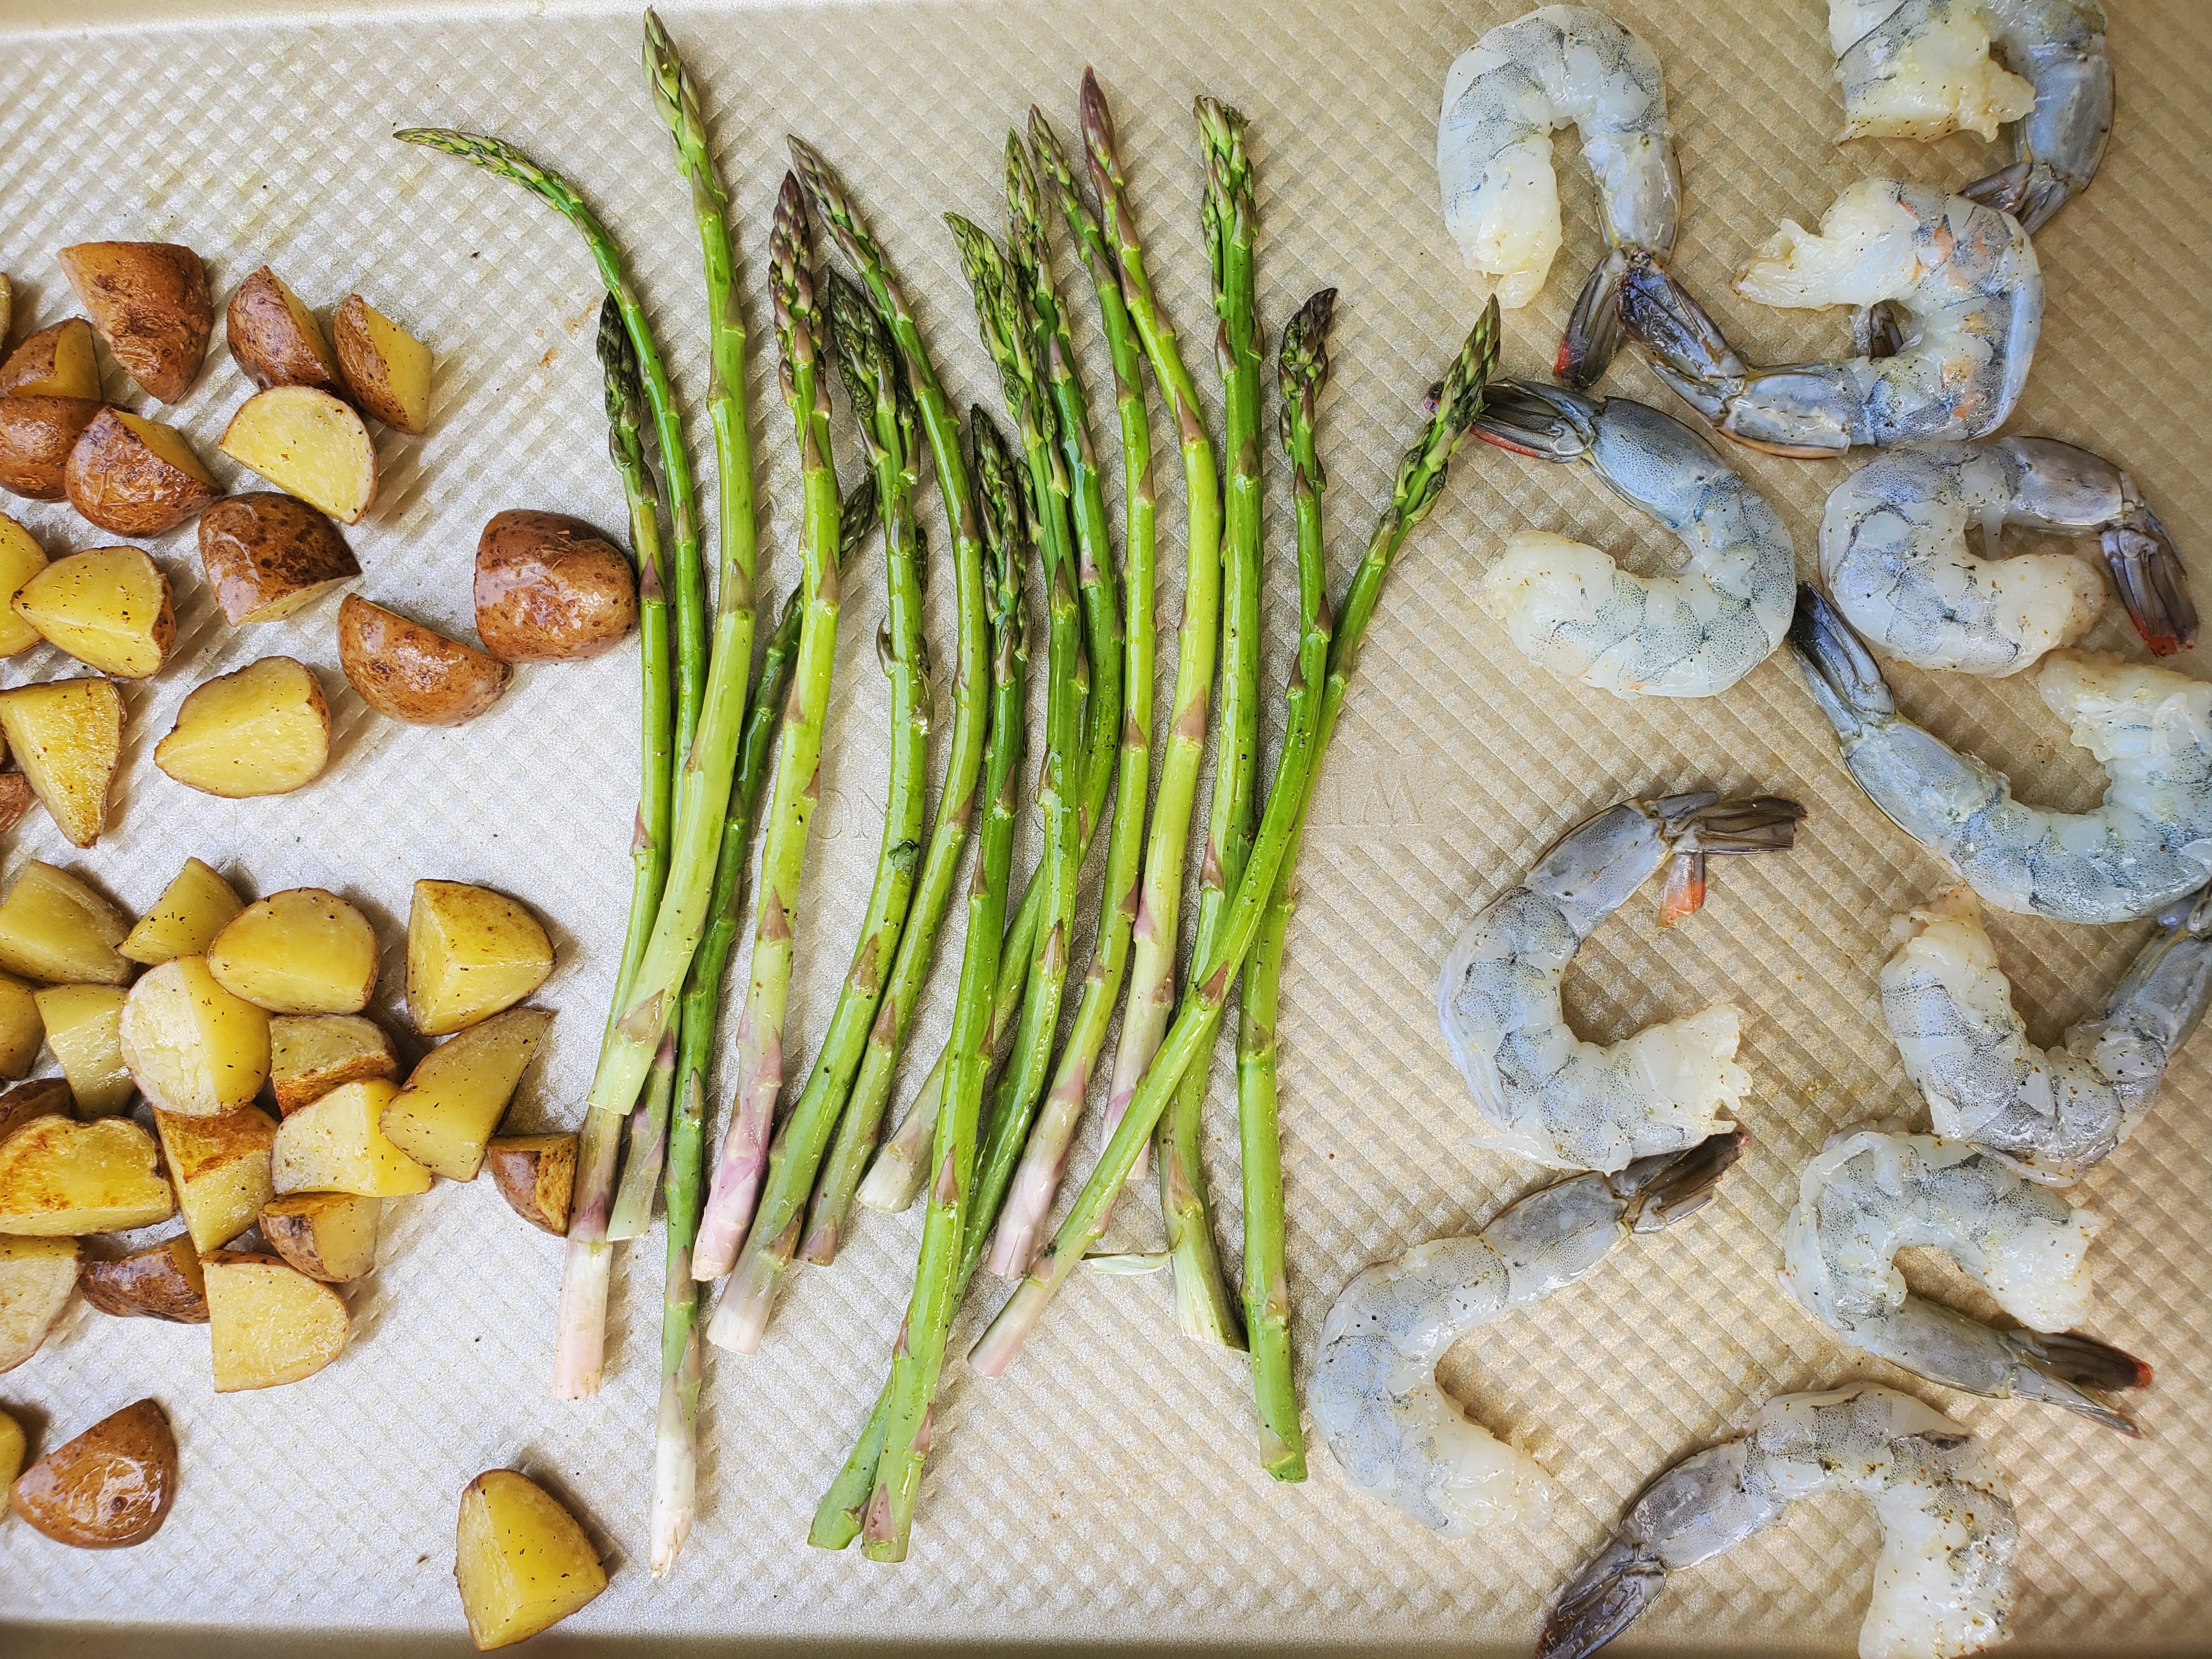 Sheet pan with the cut up potatoes partially cooked and now adding asparagus and shrimp to cook